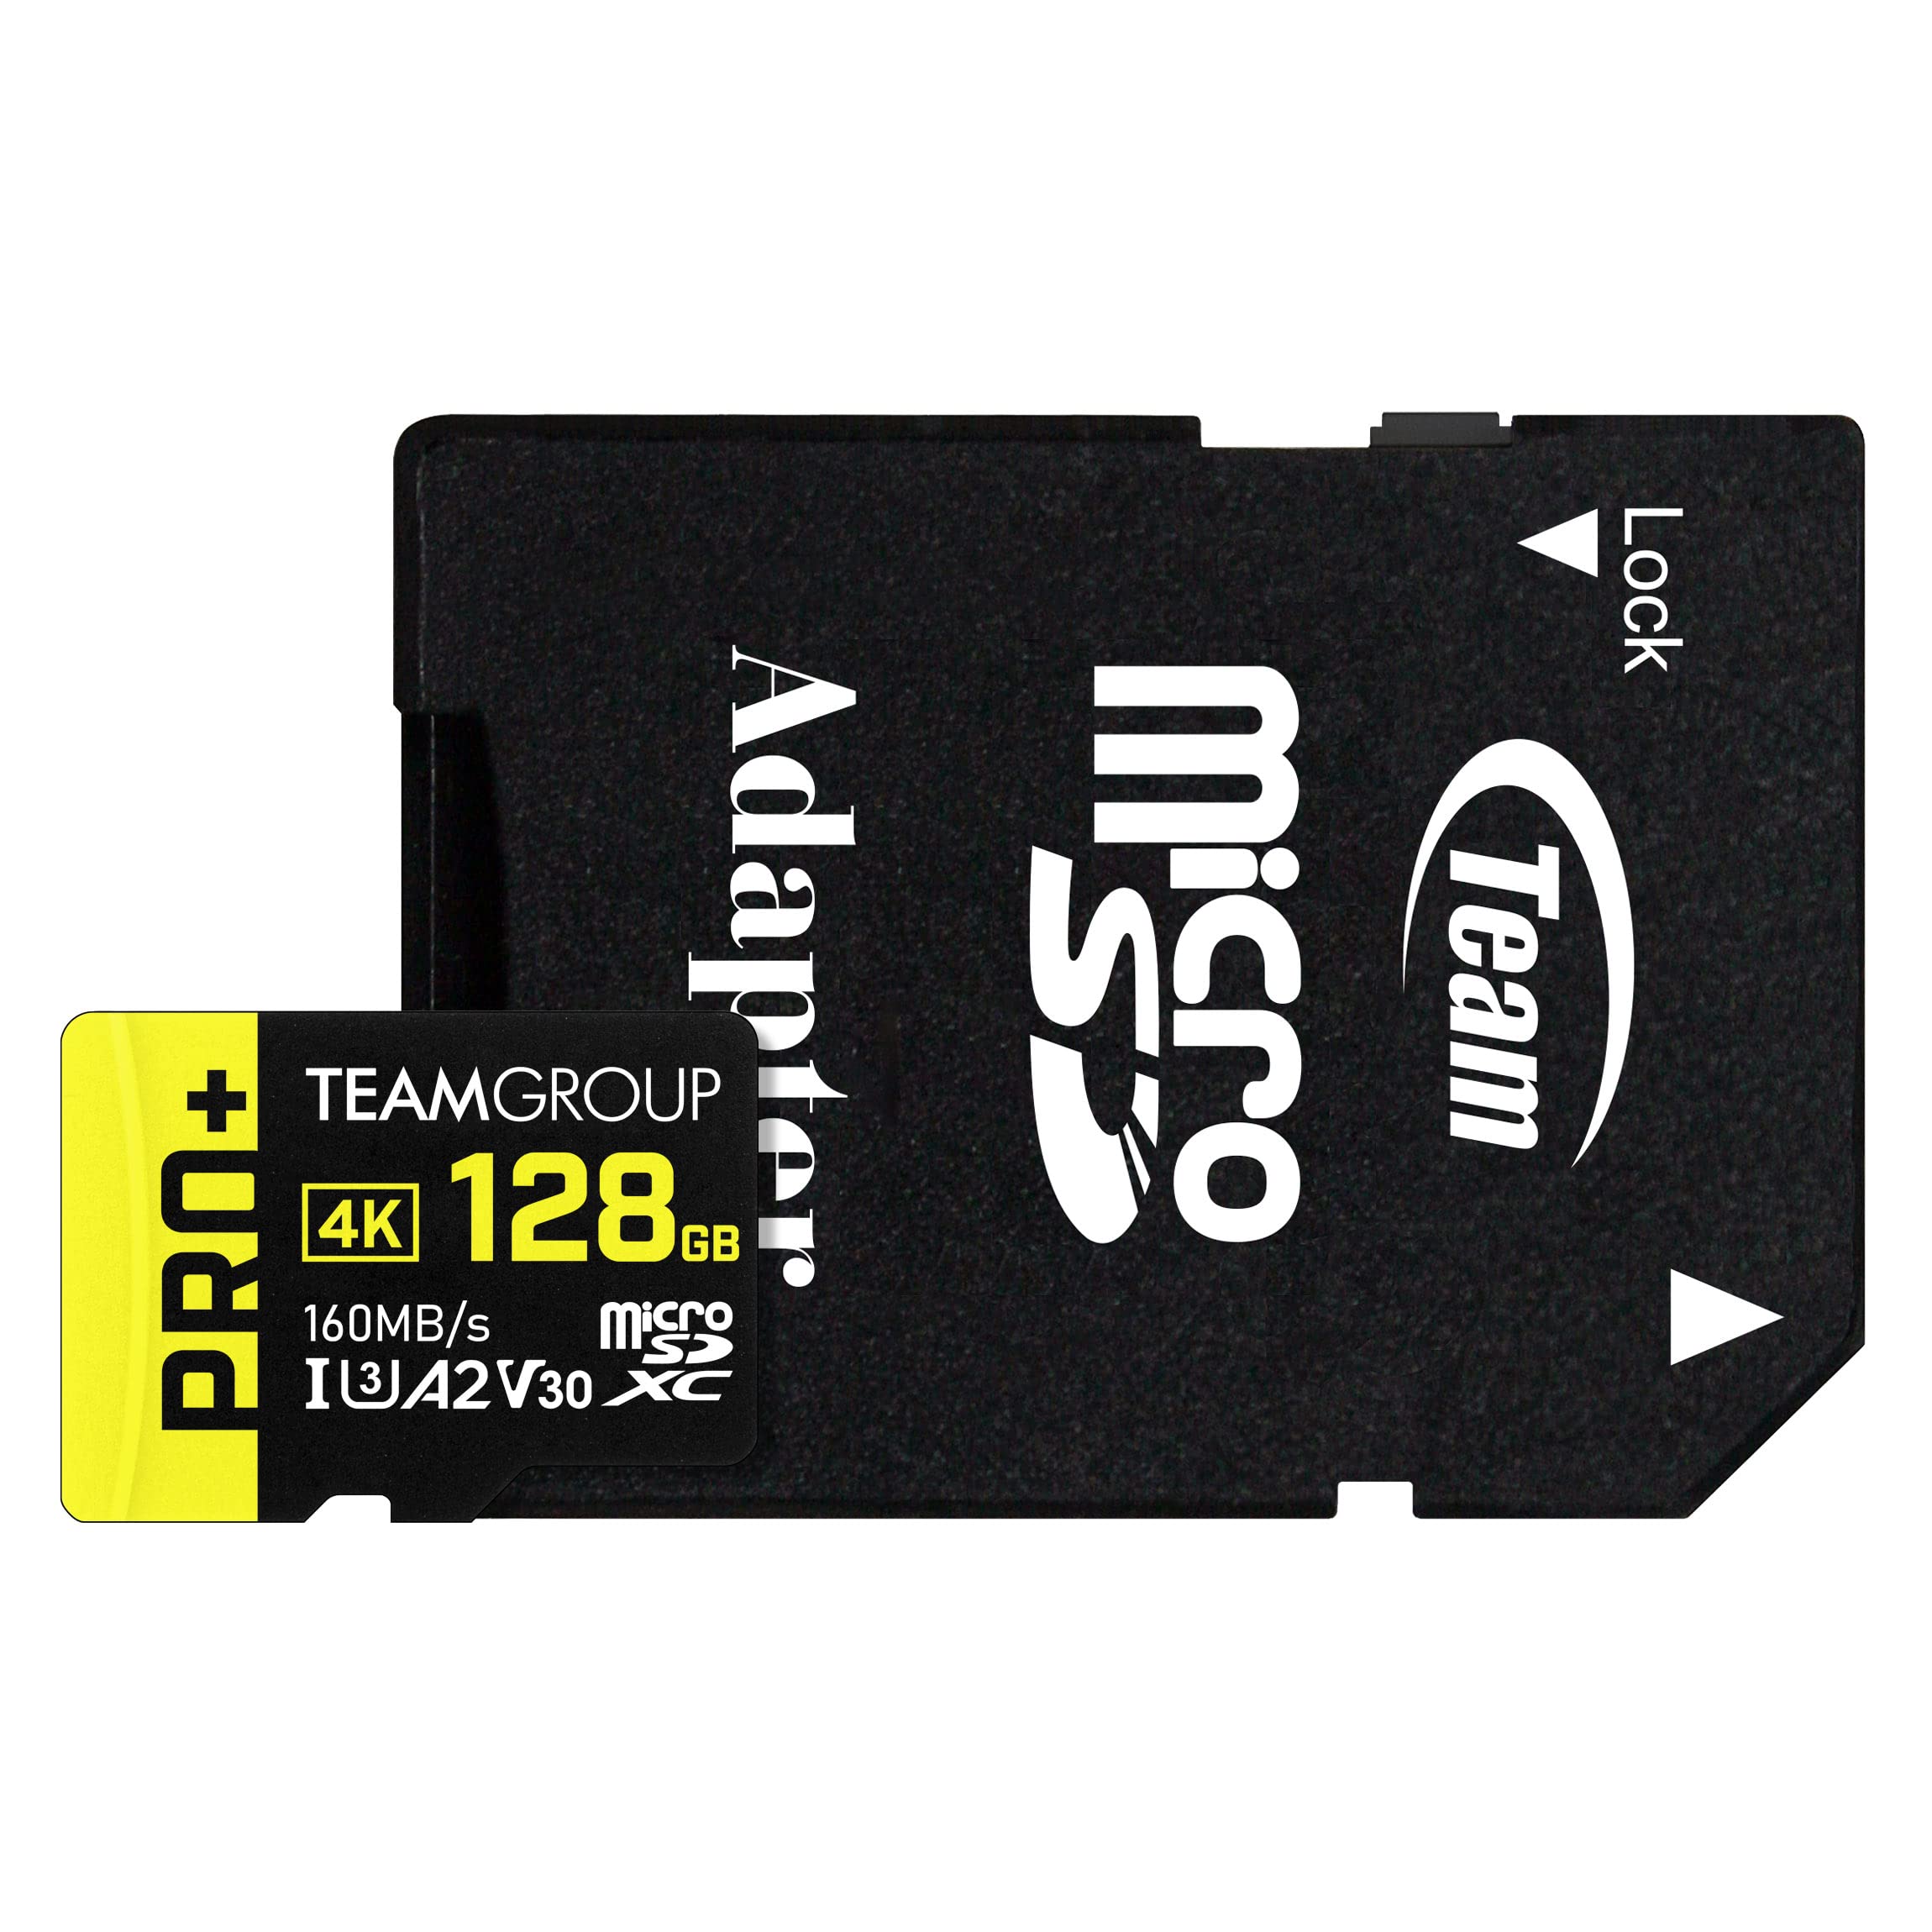 TEAMGROUP A2 Pro Plus Card 128GB Micro SDXC UHS-I U3 A2 V30, Read/Write up to 160/110 MB/s for Nintendo-Switch, Gaming Devices, Tablets, Smartphones, 4K Shooting, with Adapter TPPMSDX128GIA2V3003